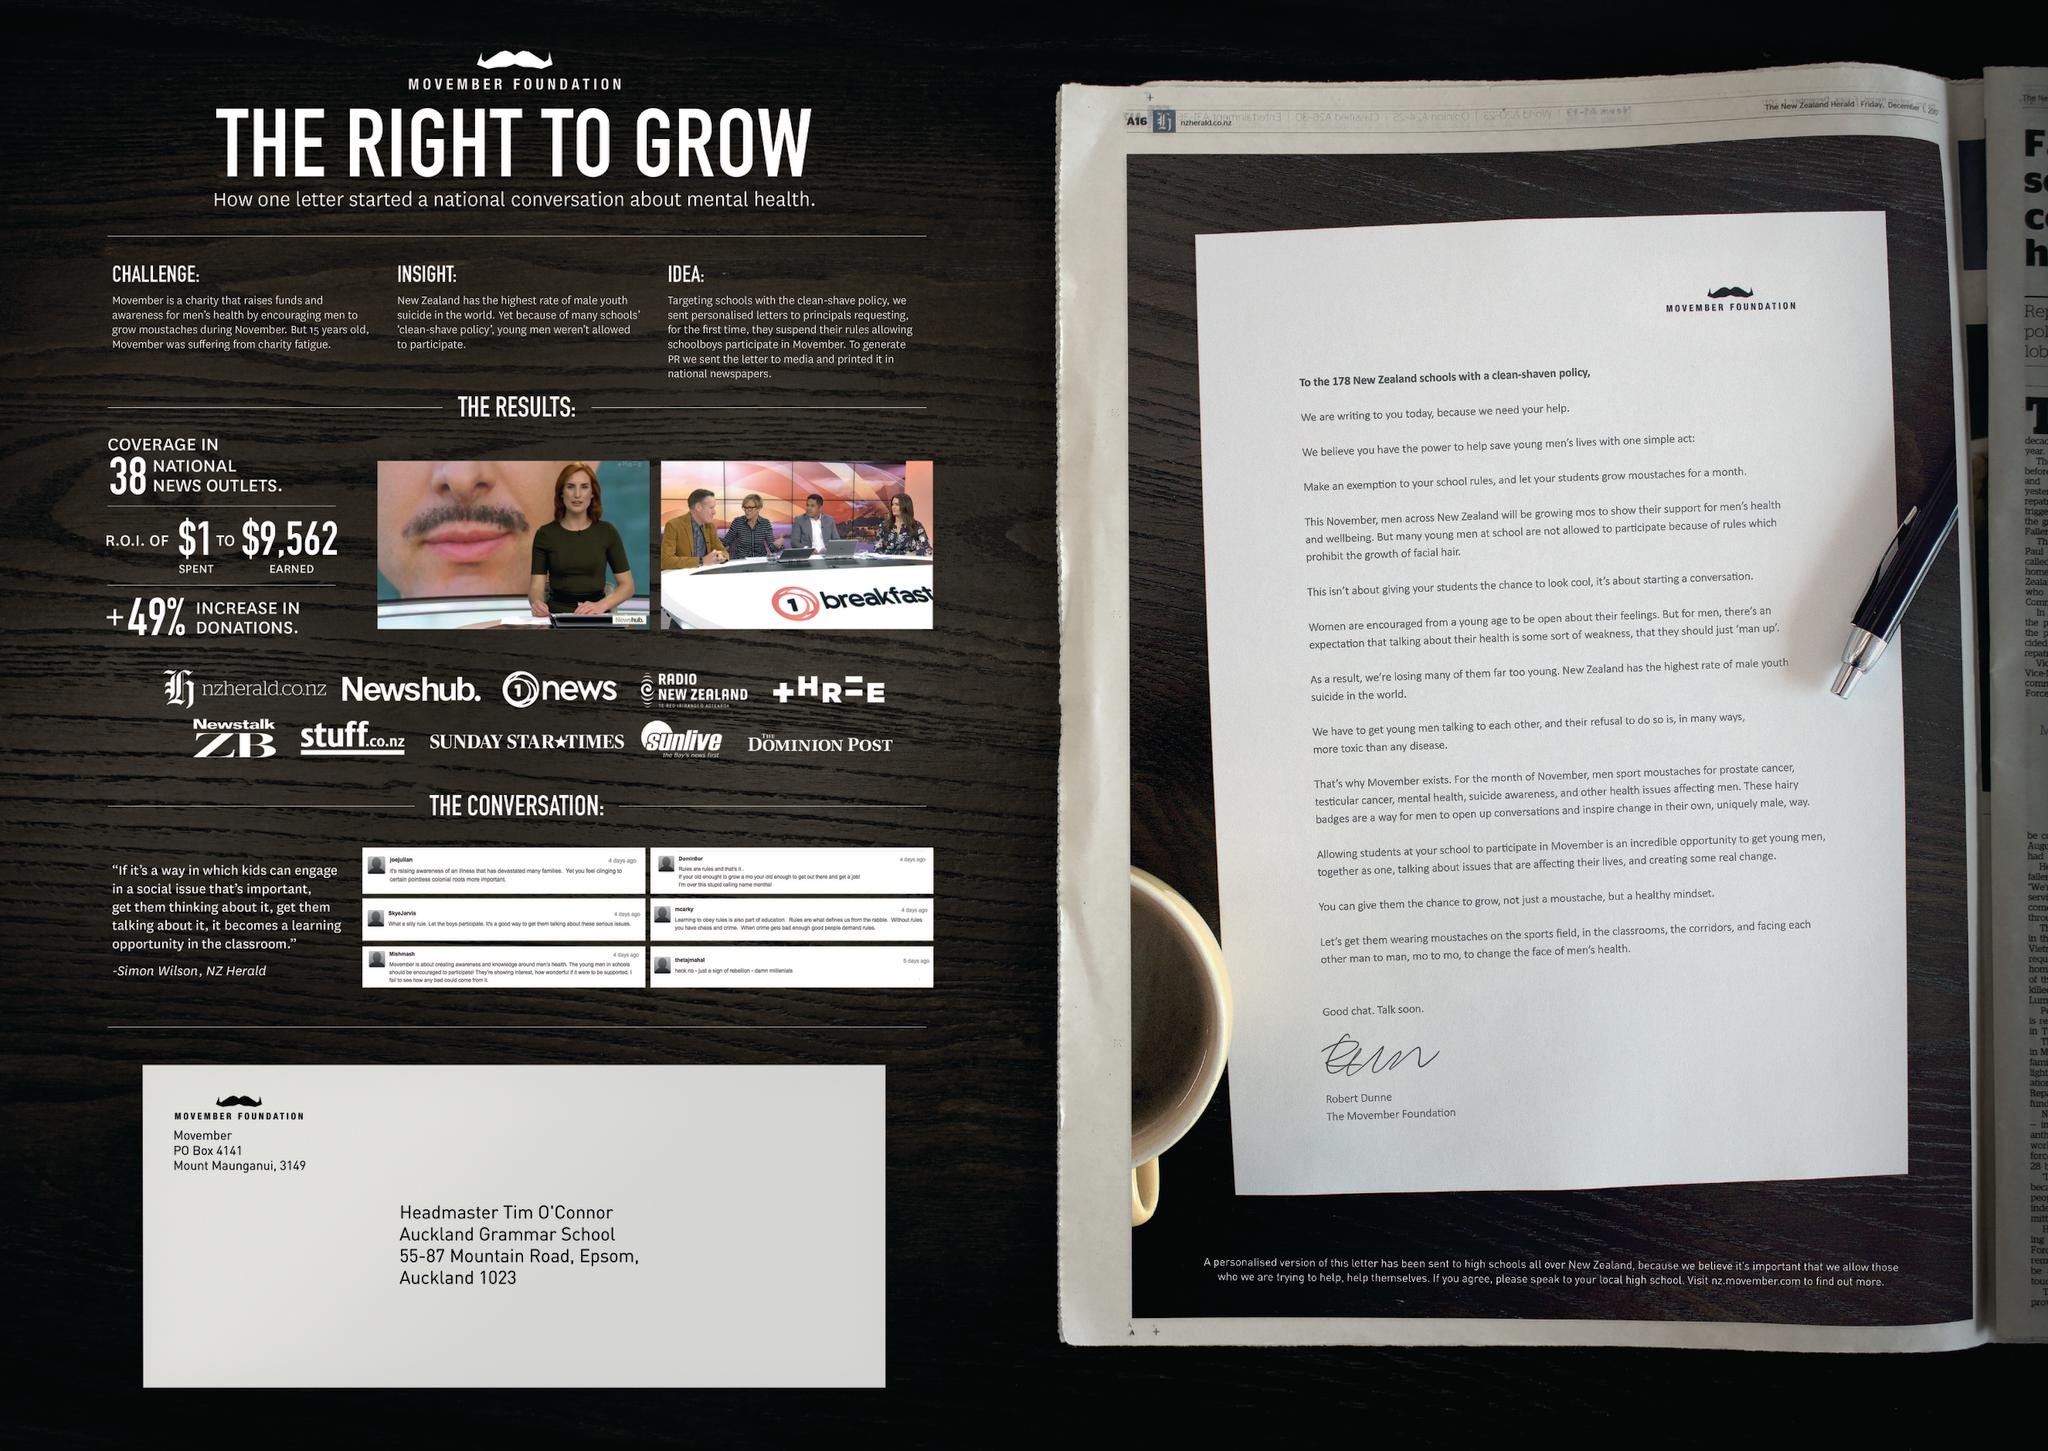 Movember - The Right to Grow